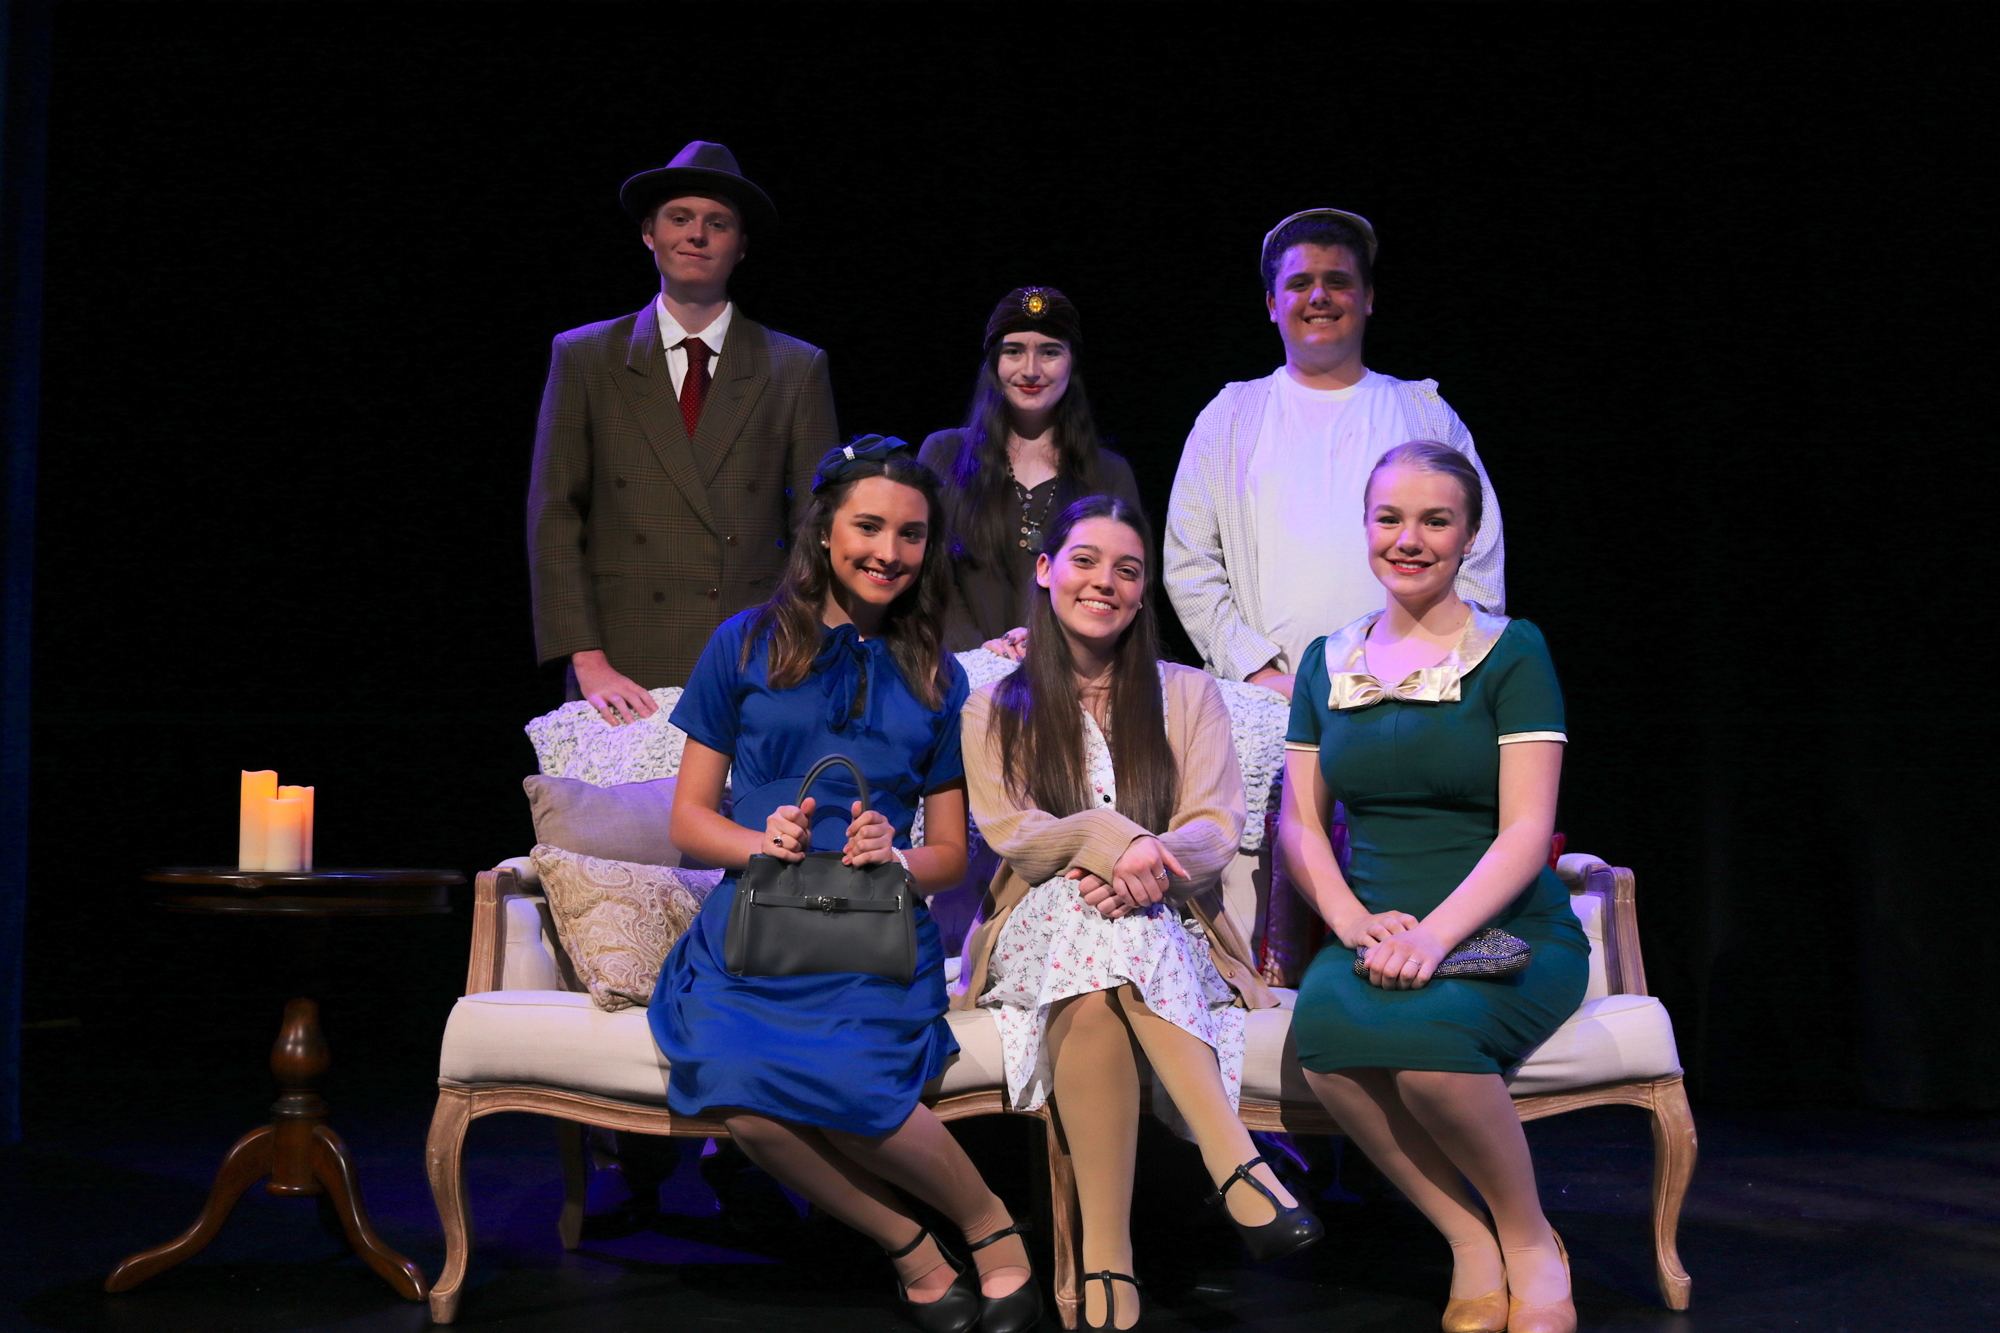 “The Medium” features a cast of six characters. Front row, from left: Maria Gullesserian, Sophia Bresciani, and Alex Sheffield. Back row, from left: Harry Sandbrook, Hannah Nagle, Cole Jackson.